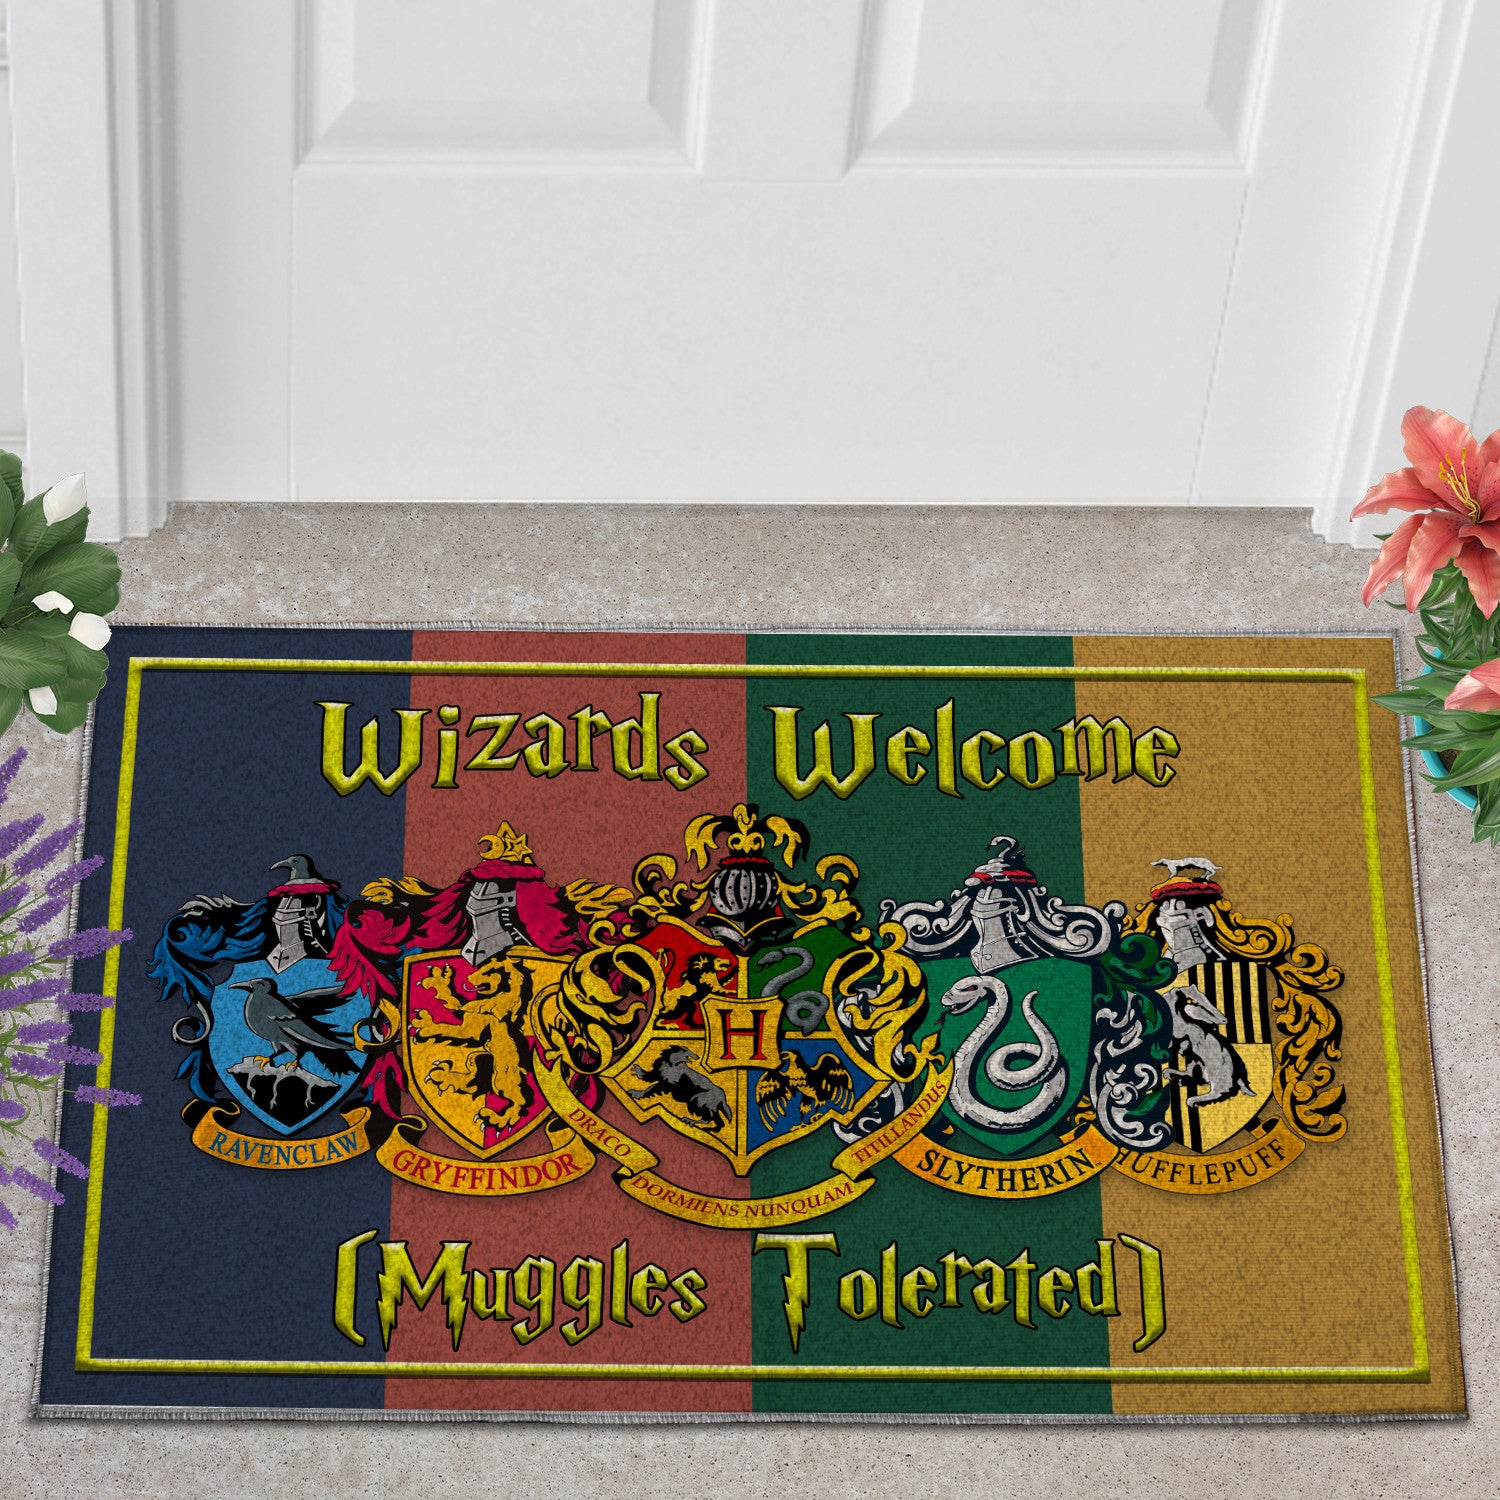 Wizards Welcome Muggles Tolerated The Magic World Doormat